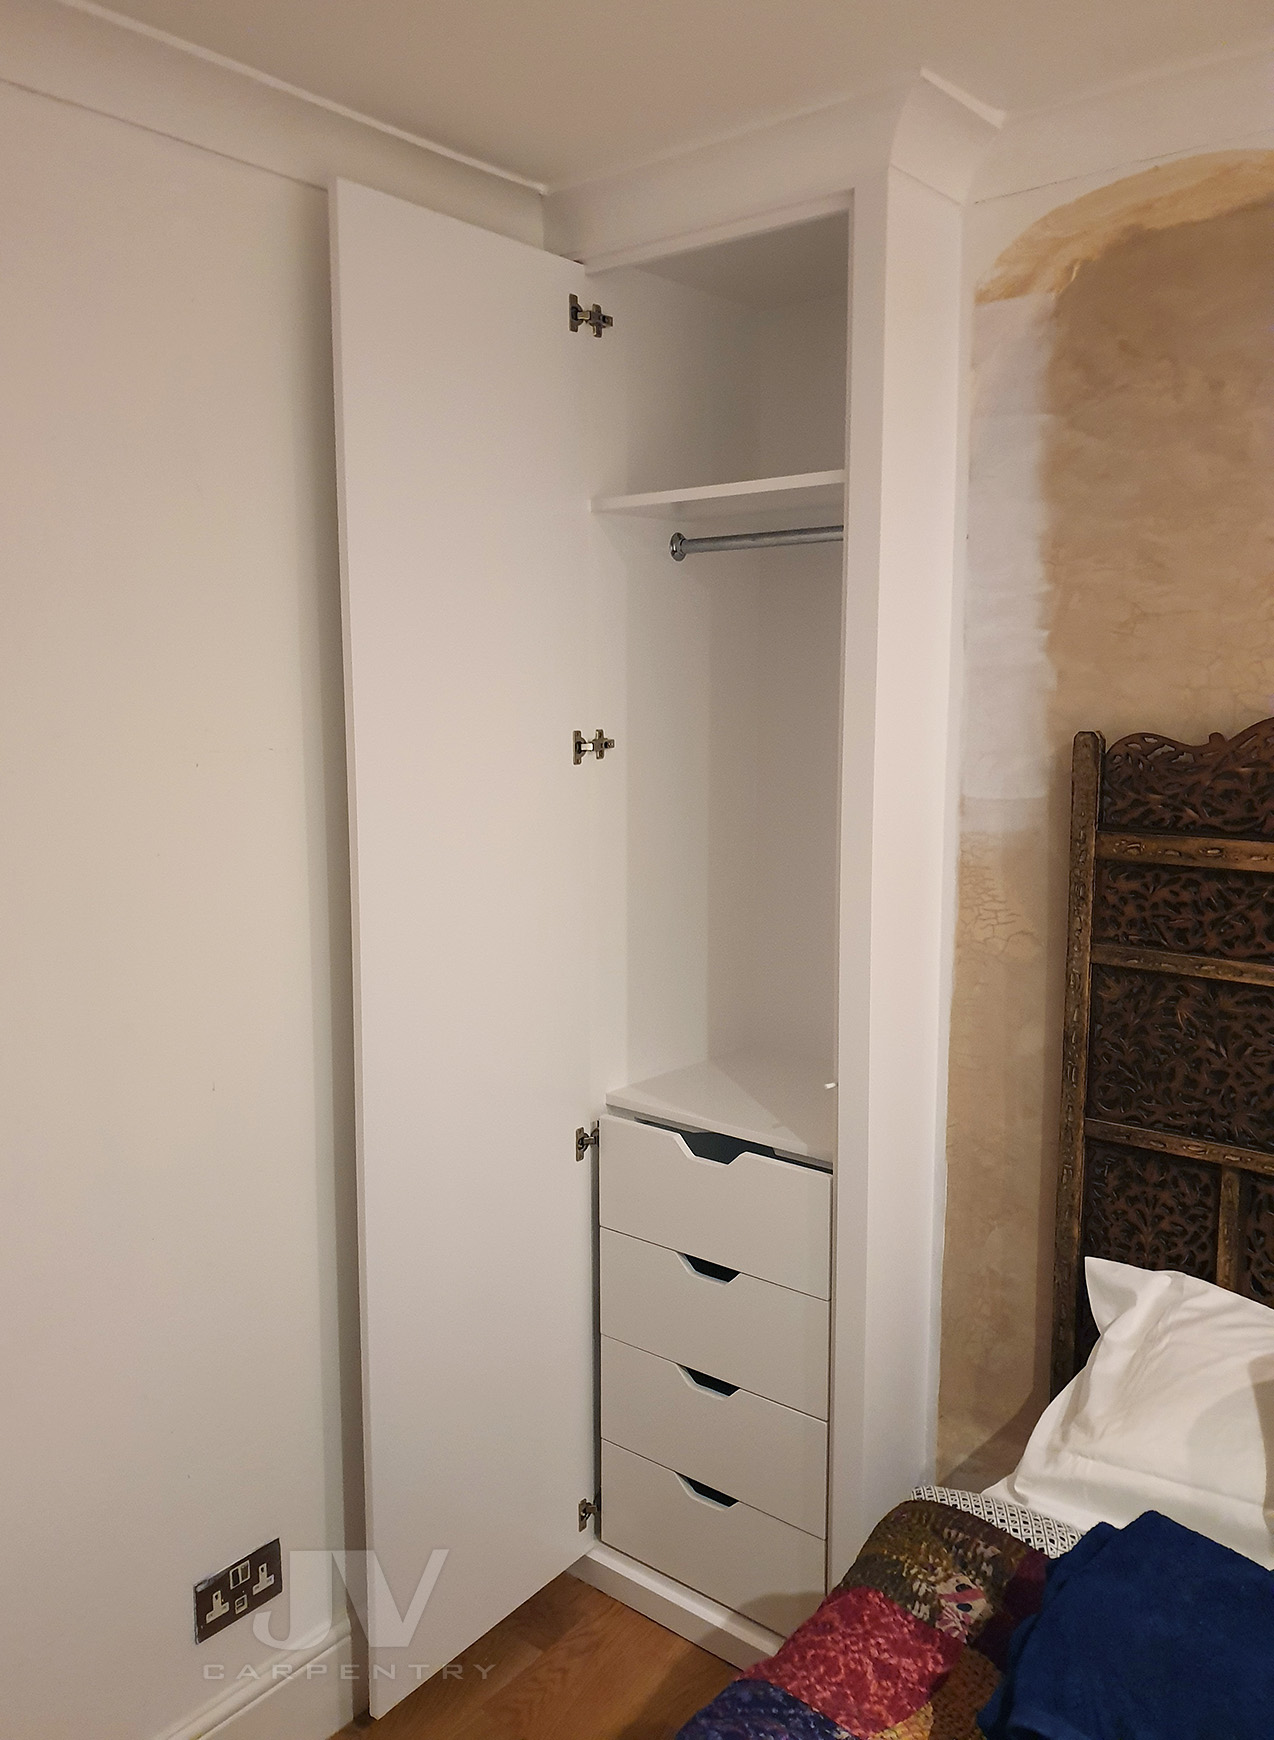 Small wardrobe by bed with open door